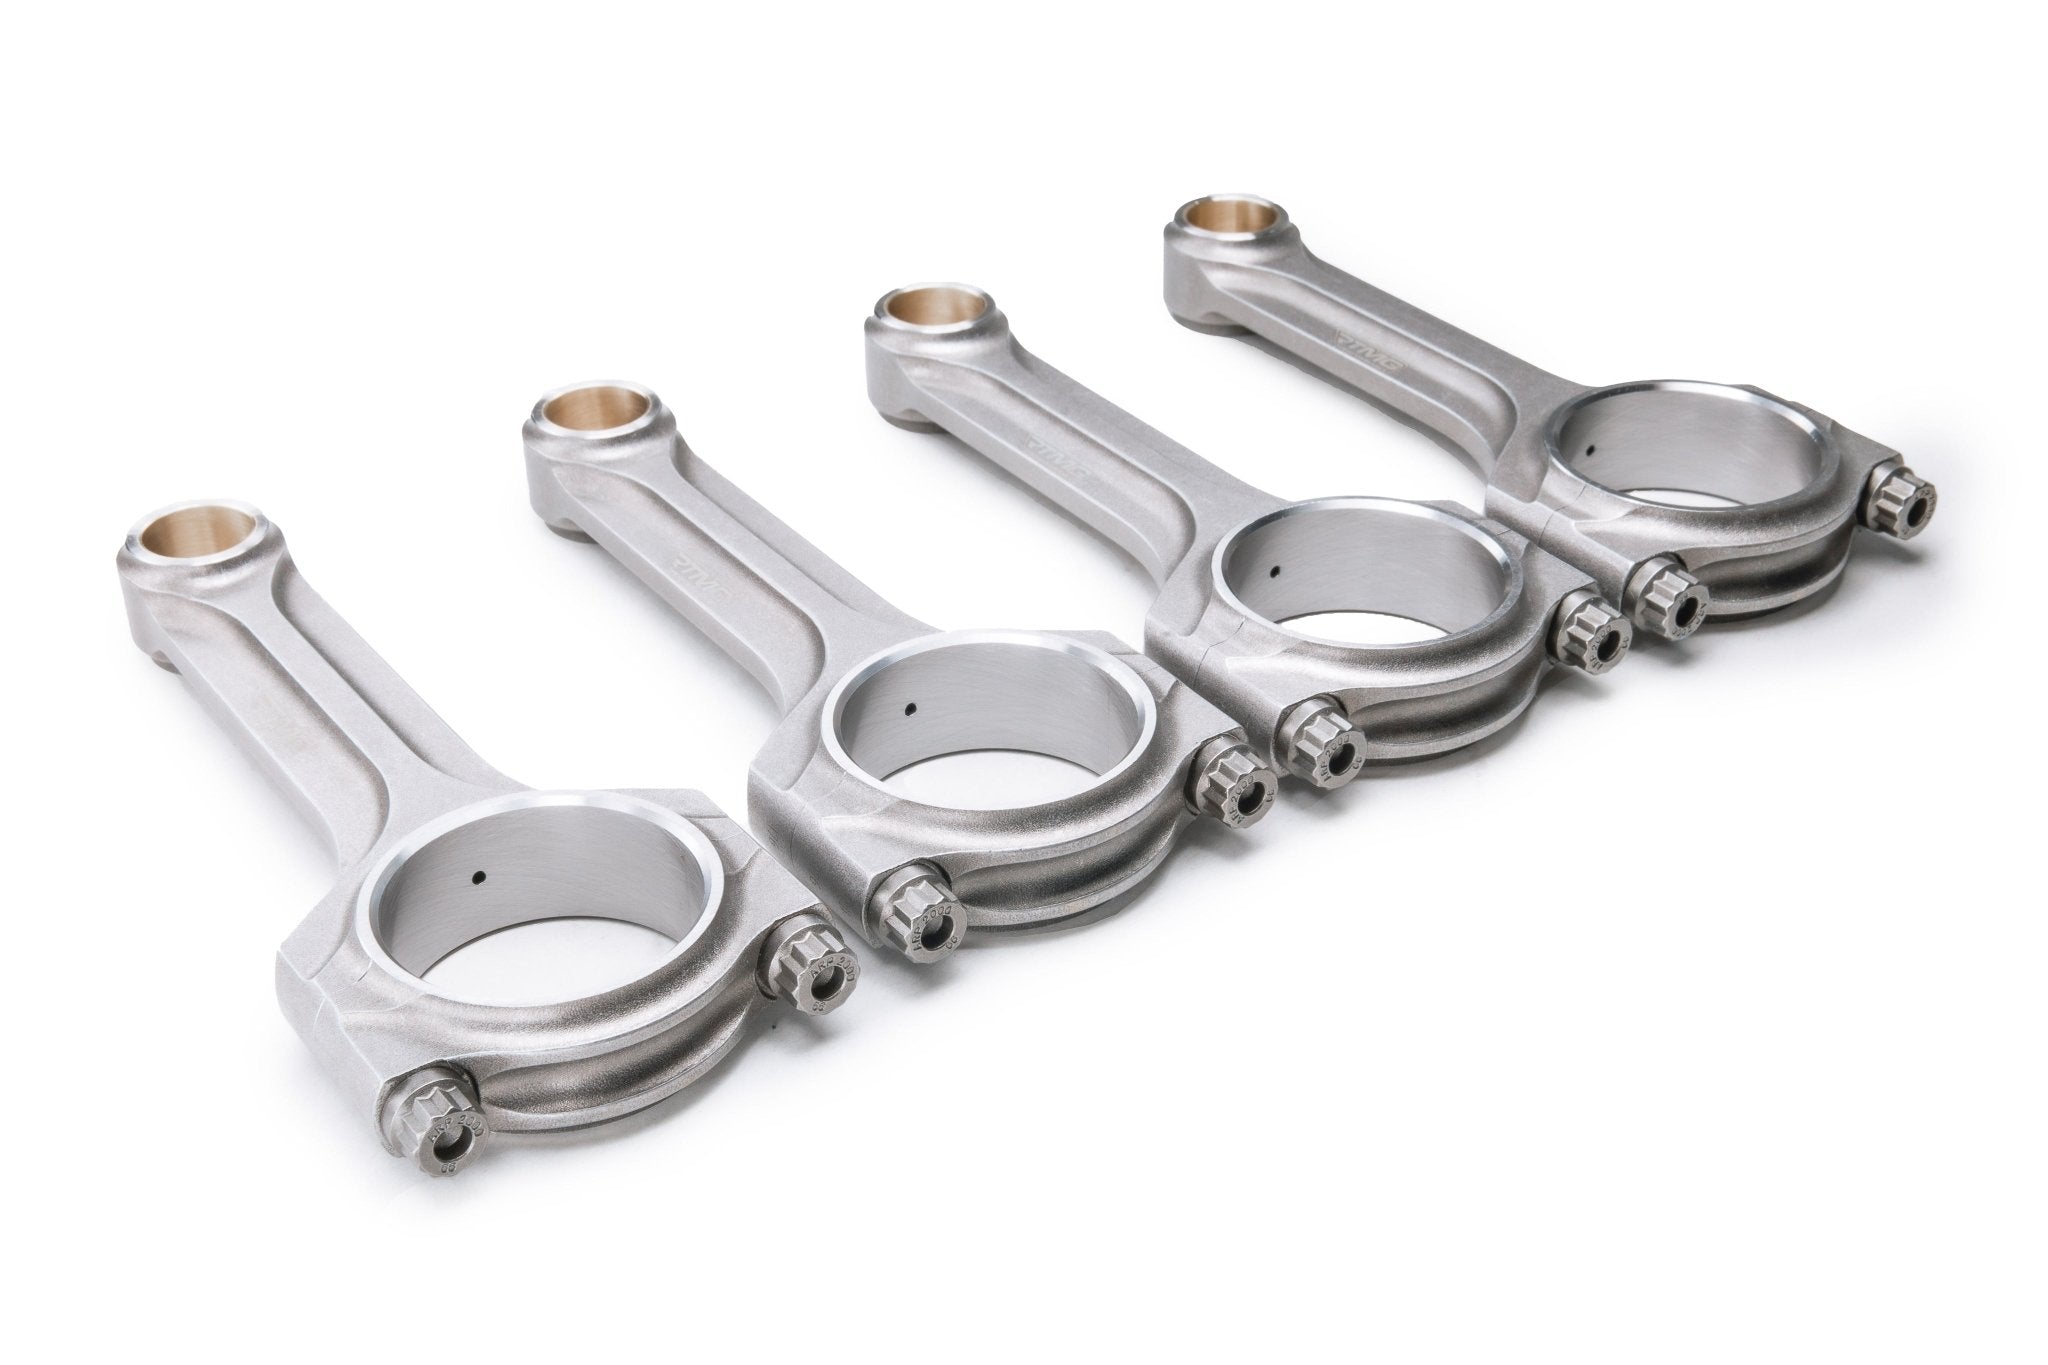 Connecting Rods Set X-Beam for 2.0 TSI EA888 Gen 2 - Up to 1000HP+ ( 2